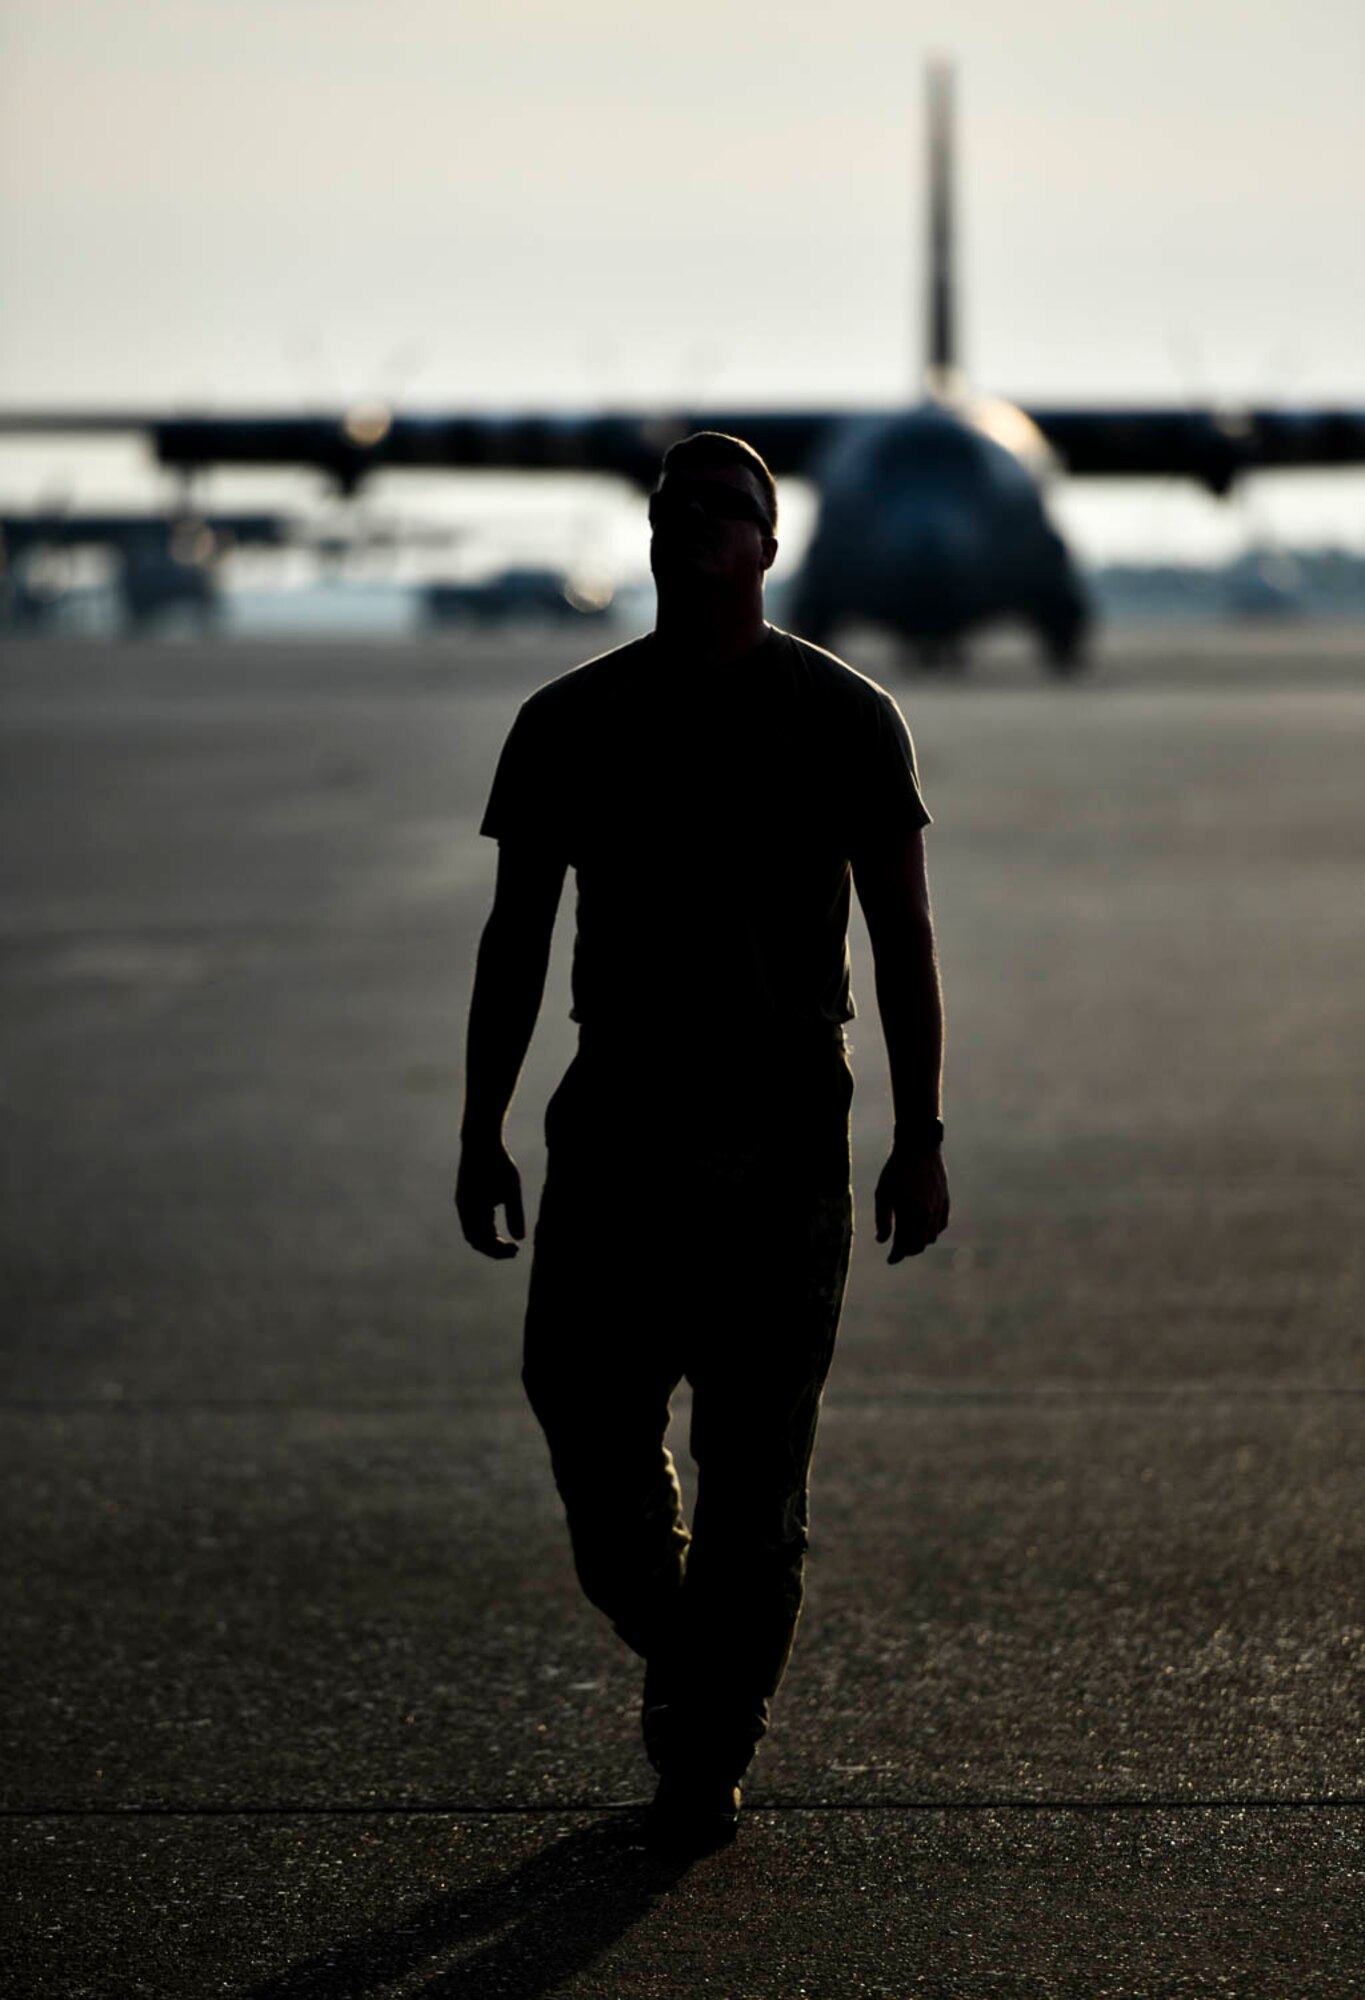 Tech. Sgt. William Mcleod, 327th Airlift Squadron loadmaster, conducts pre-flight checks before take-off as part of the Turkey Shoot competition August 7, 2019, at Little Rock Air Force Base, Ark. The Turkey Shoot is a multi-event test which evaluates all aspects of combat airlift such as threat mitigation, container delivery system airdrops, assault landings and loading and offloading vehicles. The majority of our Reserve members must meet the same requirements of Active Duty personnel. This entails balancing a fulltime civilian job or college studies while maintaining their military readiness. (U.S. Air Force Reserve photo by Senior Airman Nathan Byrnes)